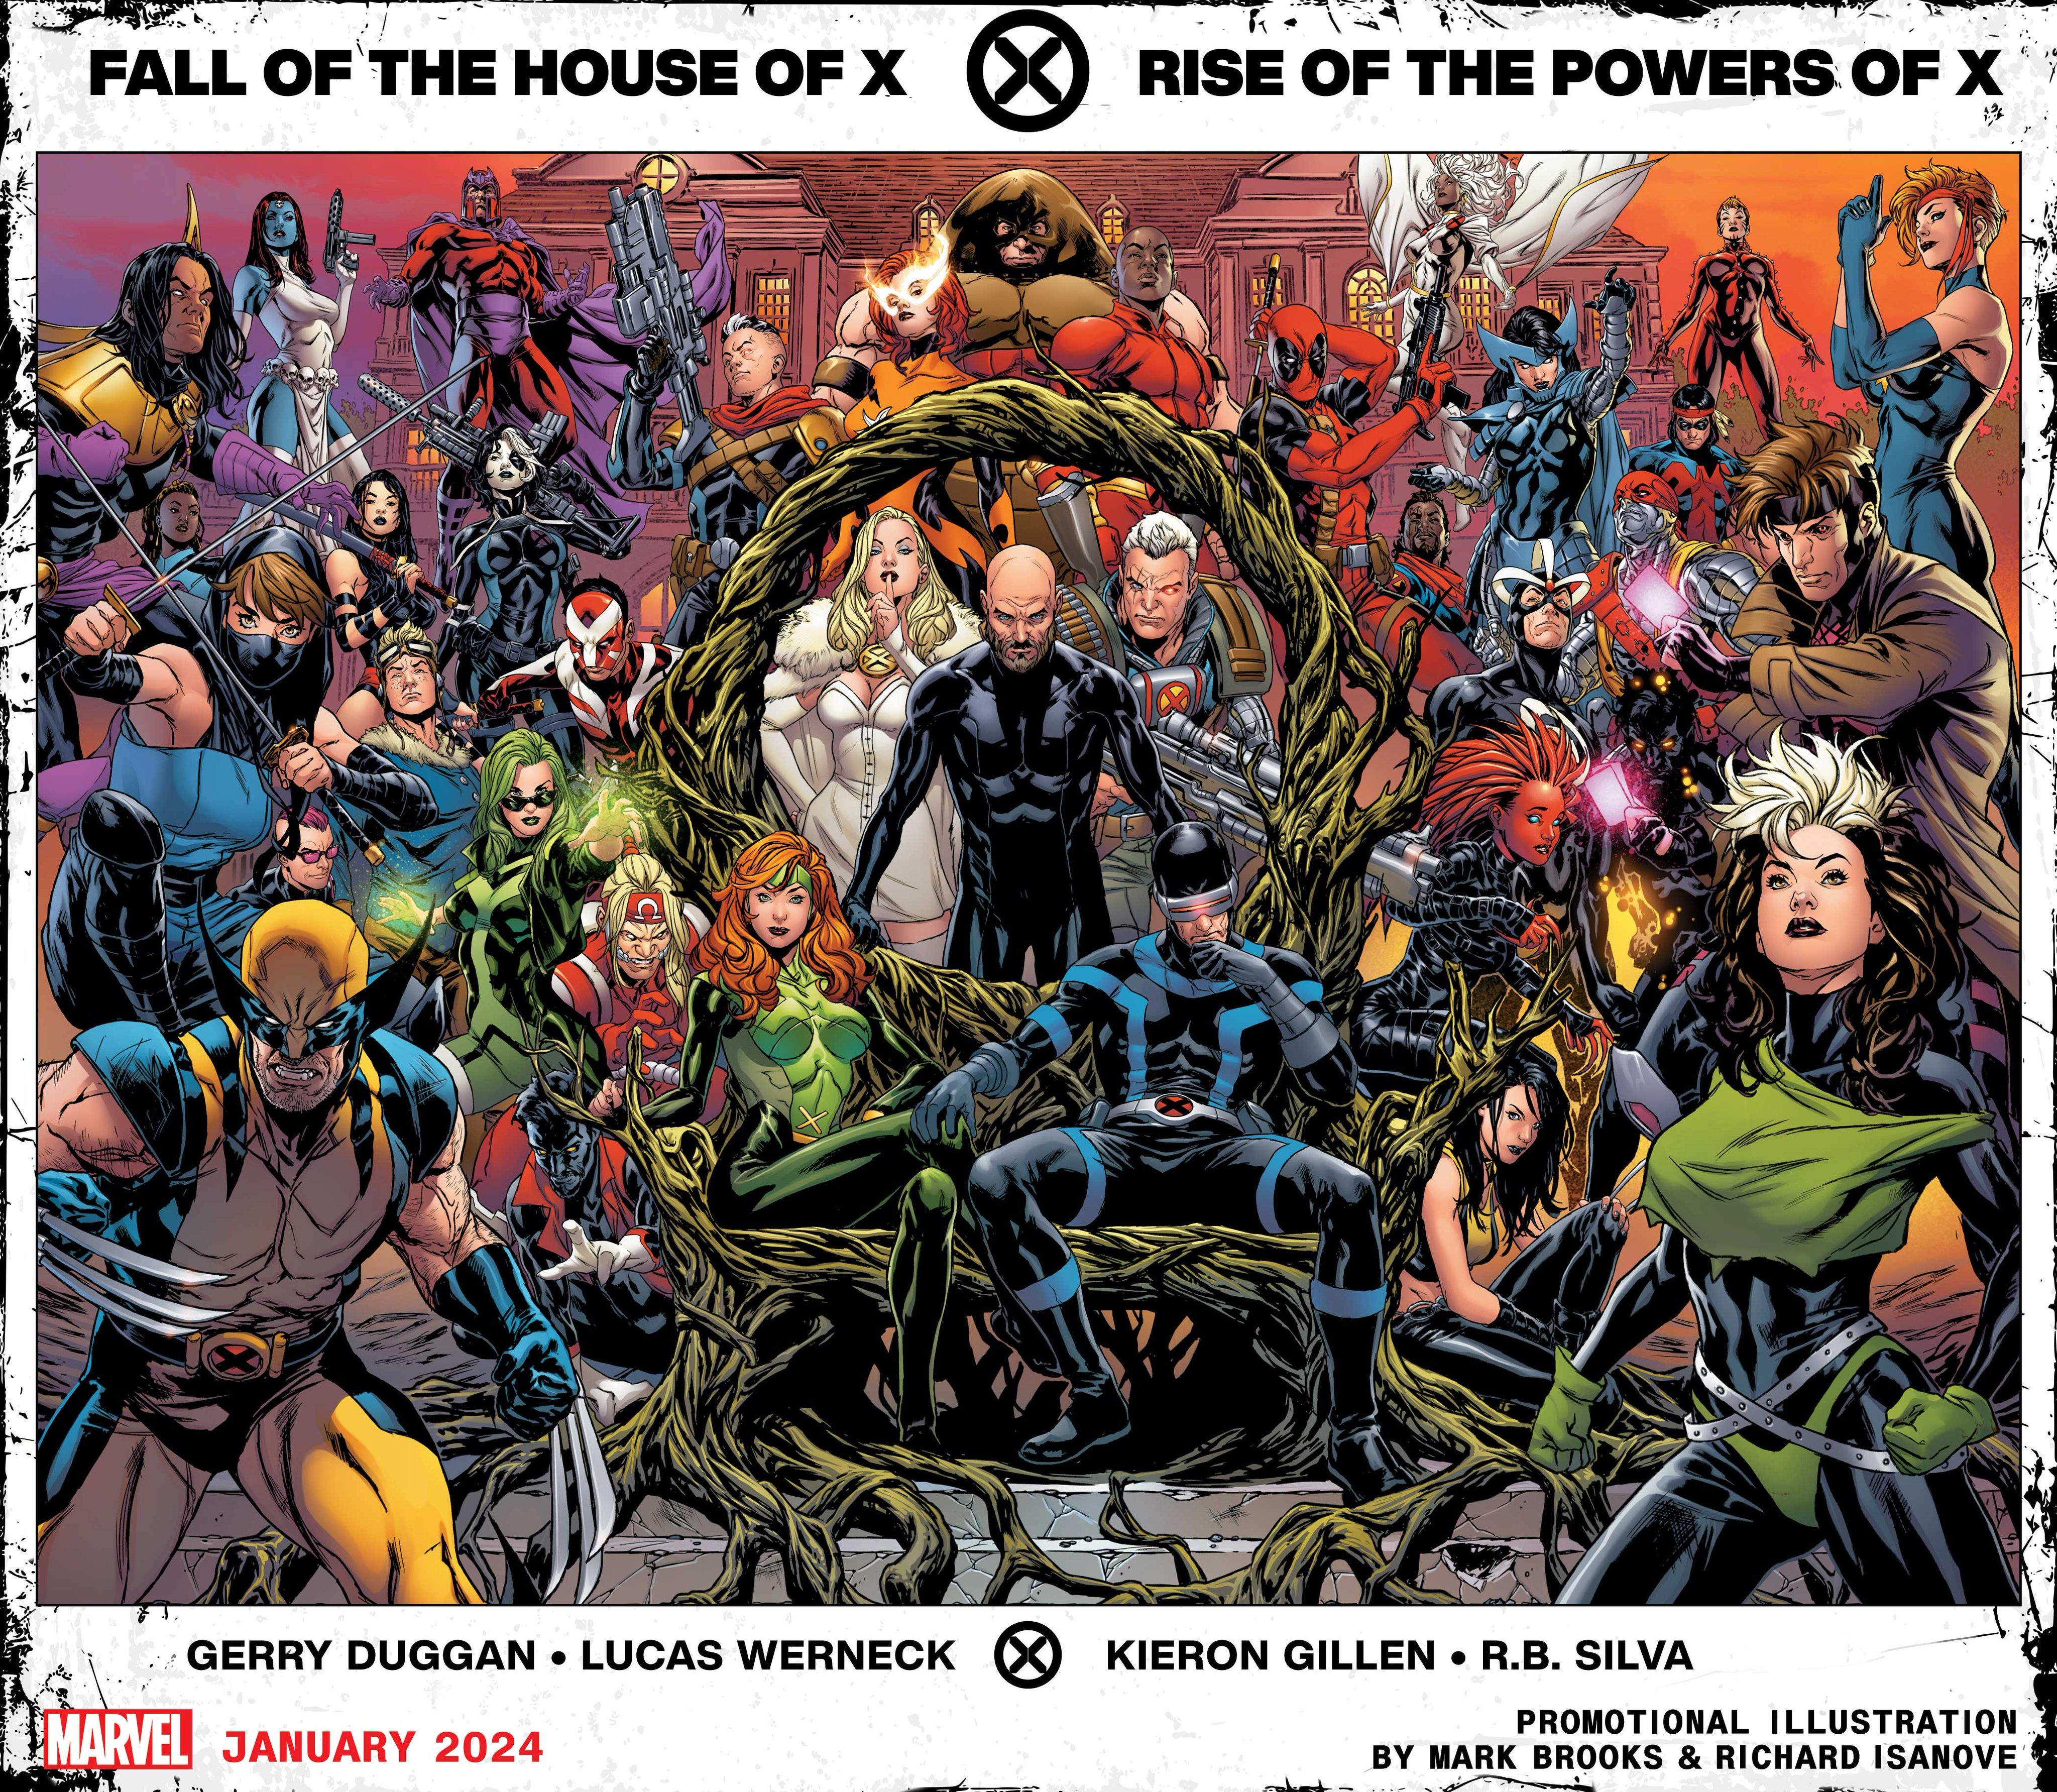 fall-of-the-house-of-x-rise-of-the-powers-of-x-marvel-x-men-teaser.jpg